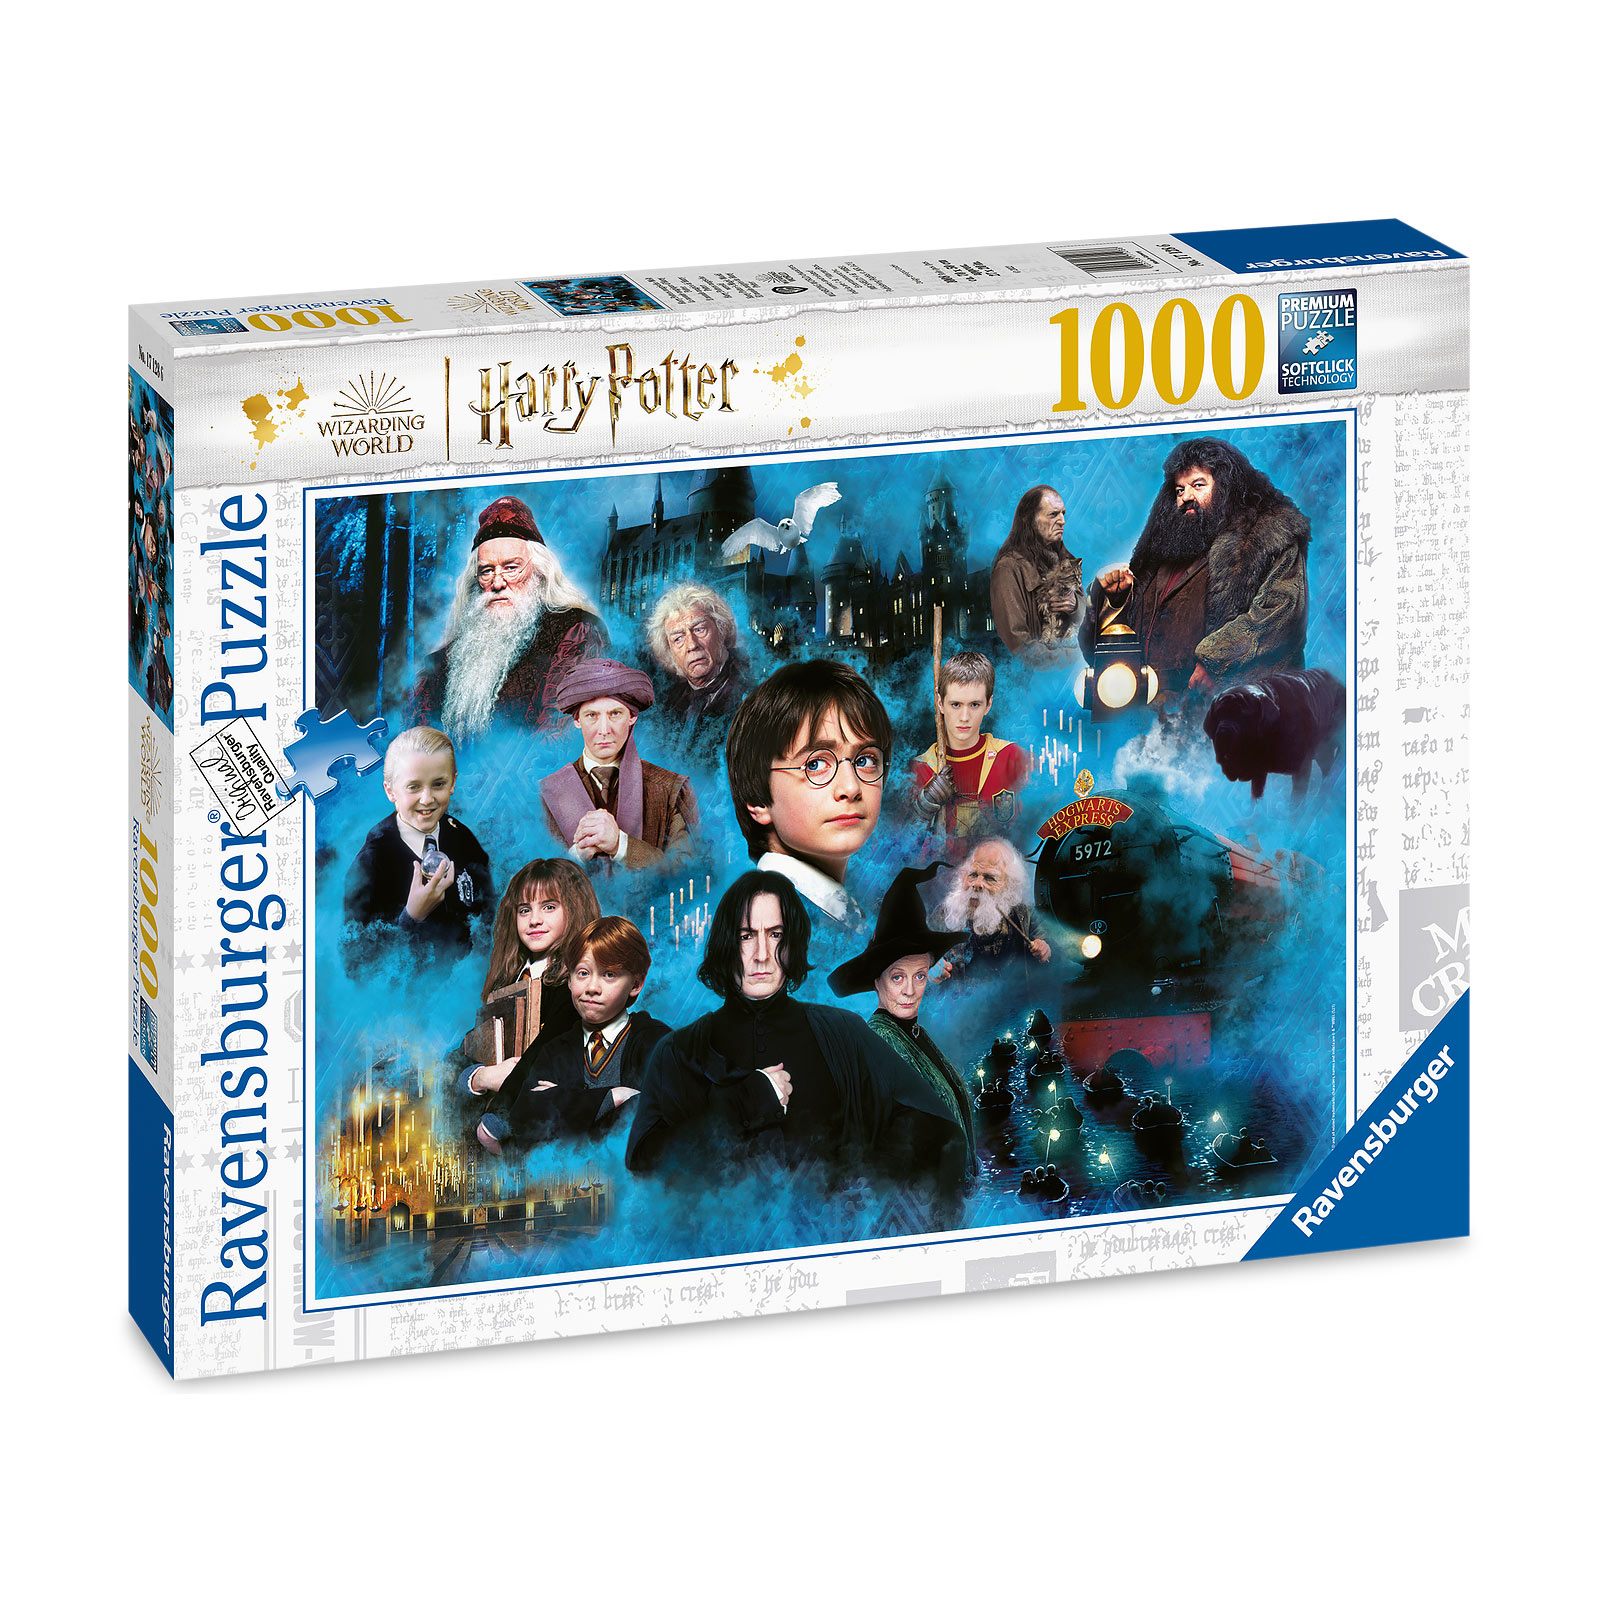 Harry Potter's magical world - Puzzle 1000 pieces